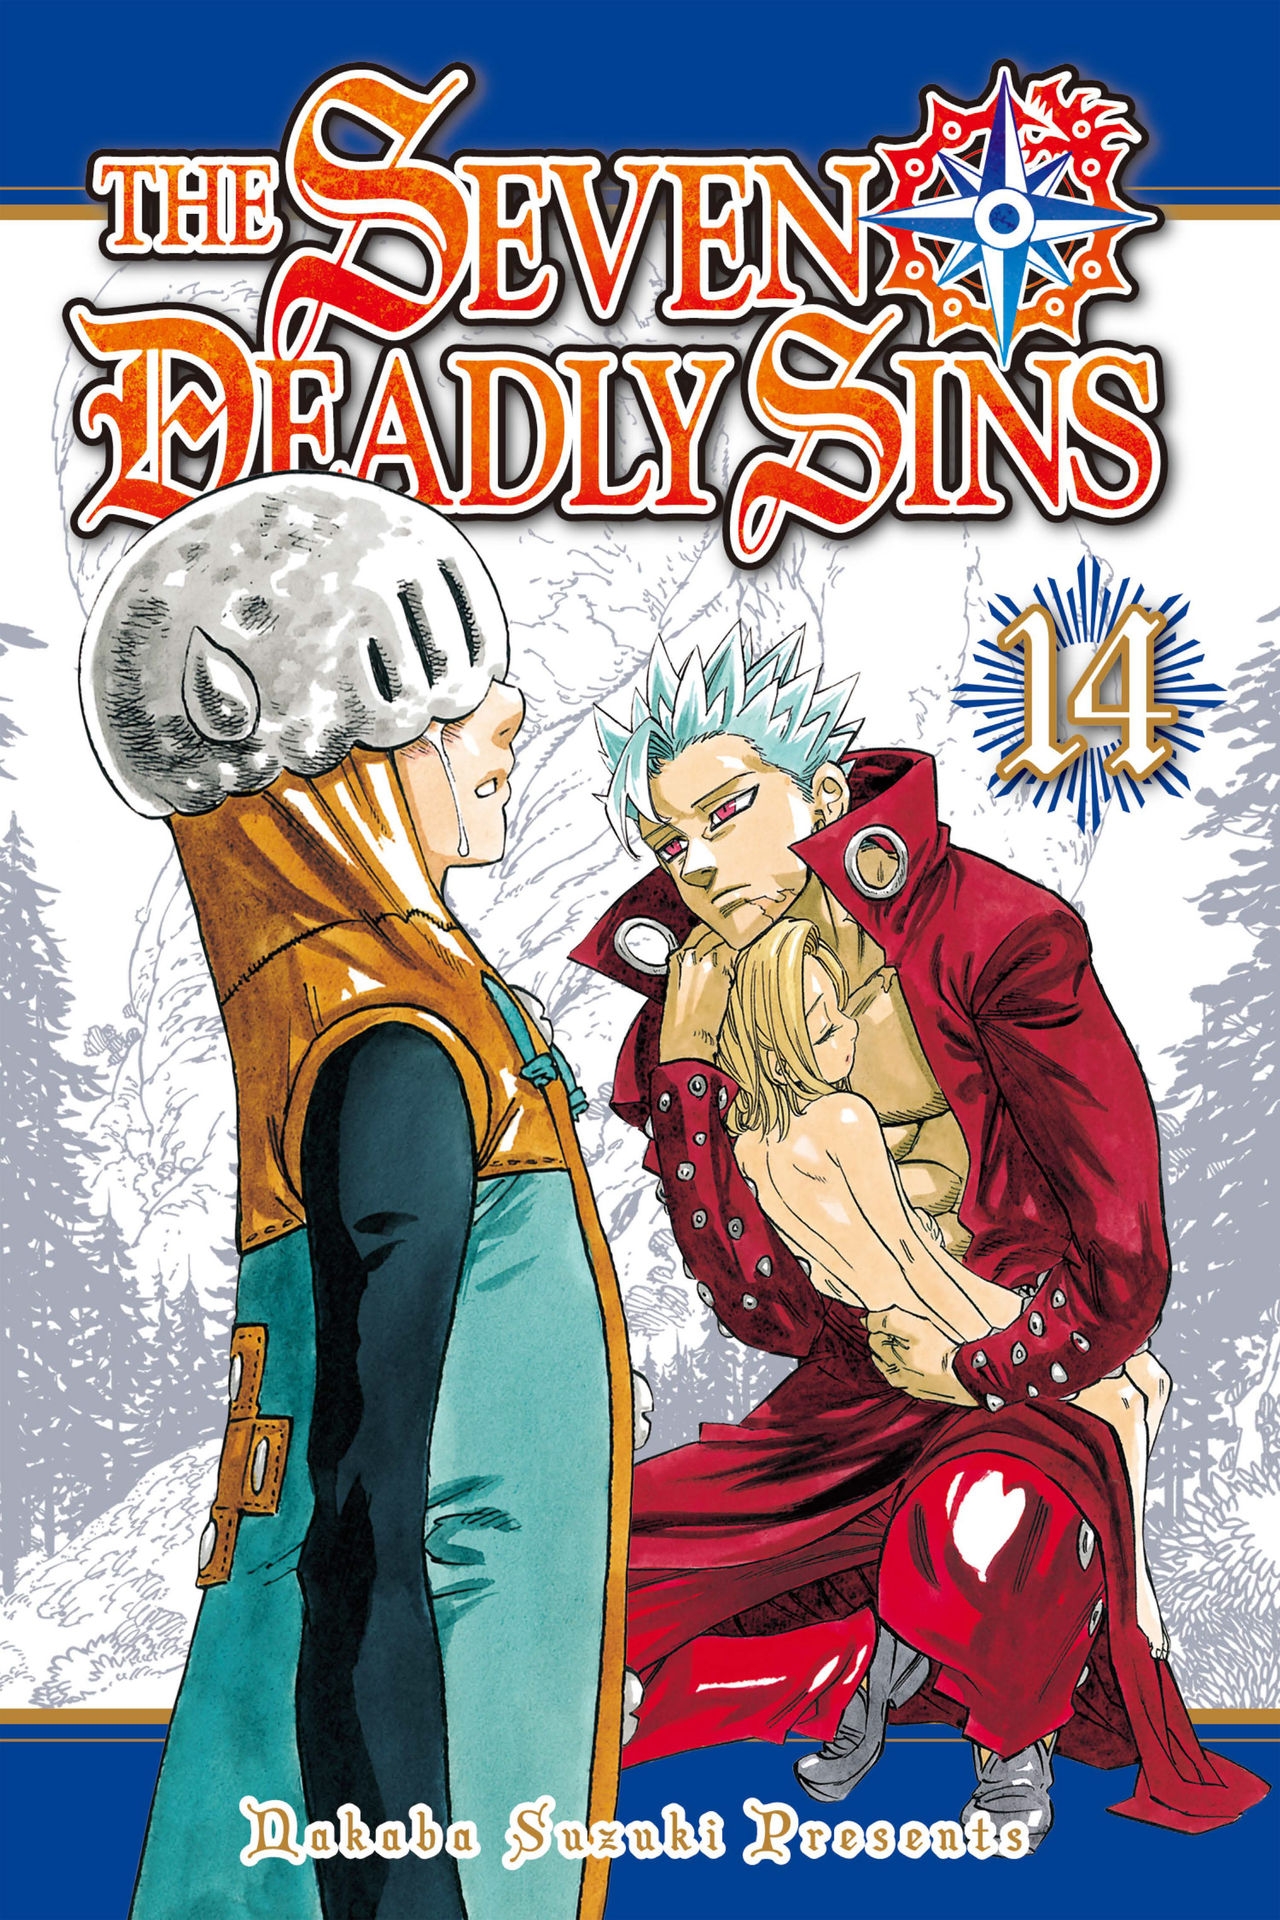 The Seven Deadly Sins (Covers & Chapter Title Cards) 300